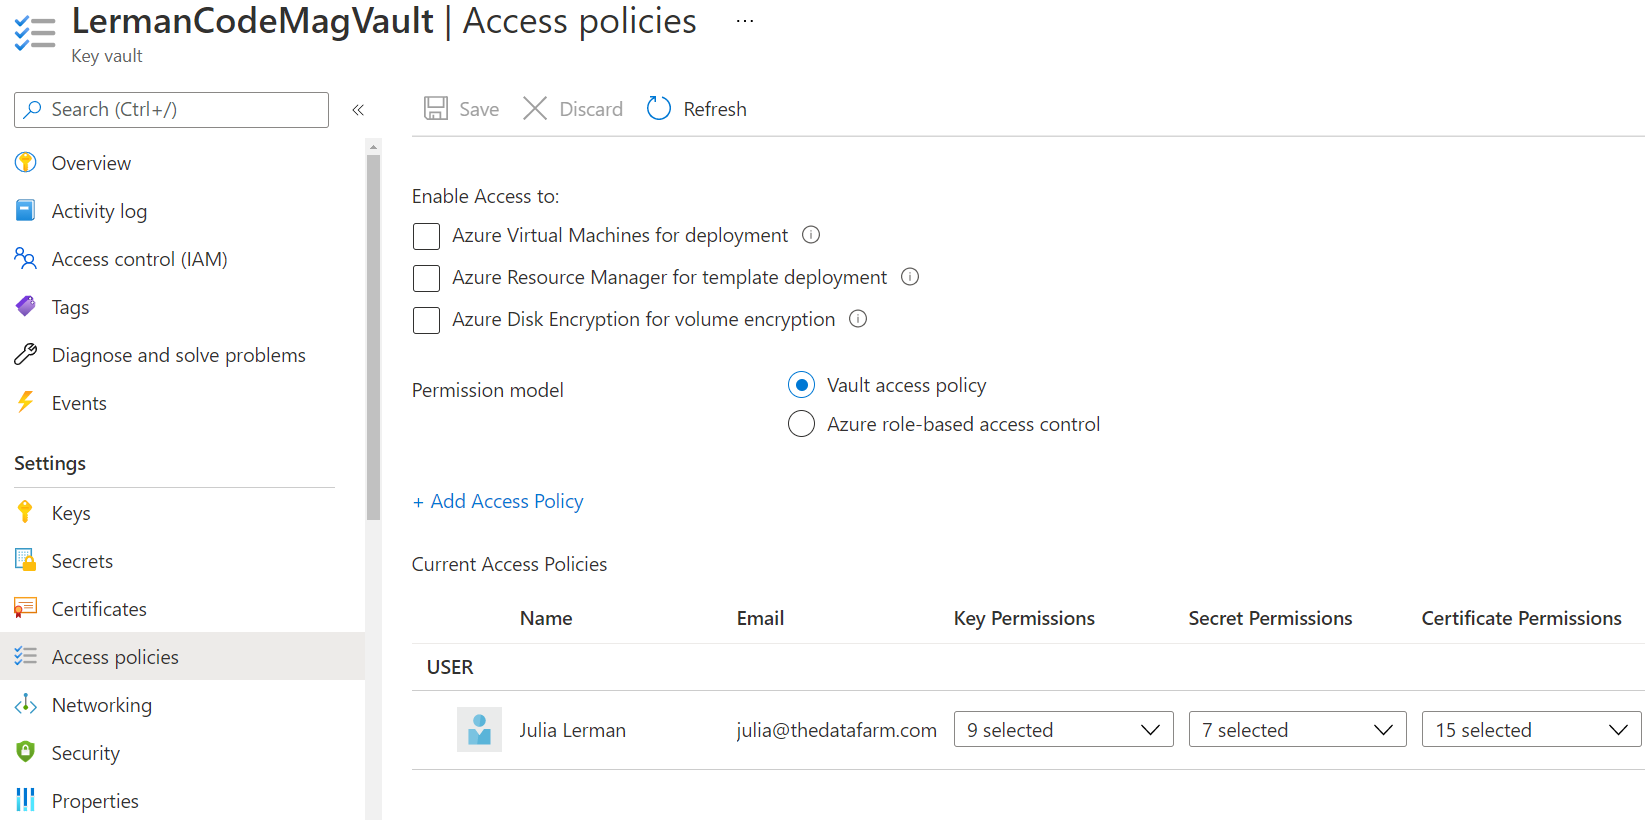 Figure 2:       The default access policy that allows my log in broad access to items in the LermanCodeMagVault Key Vault